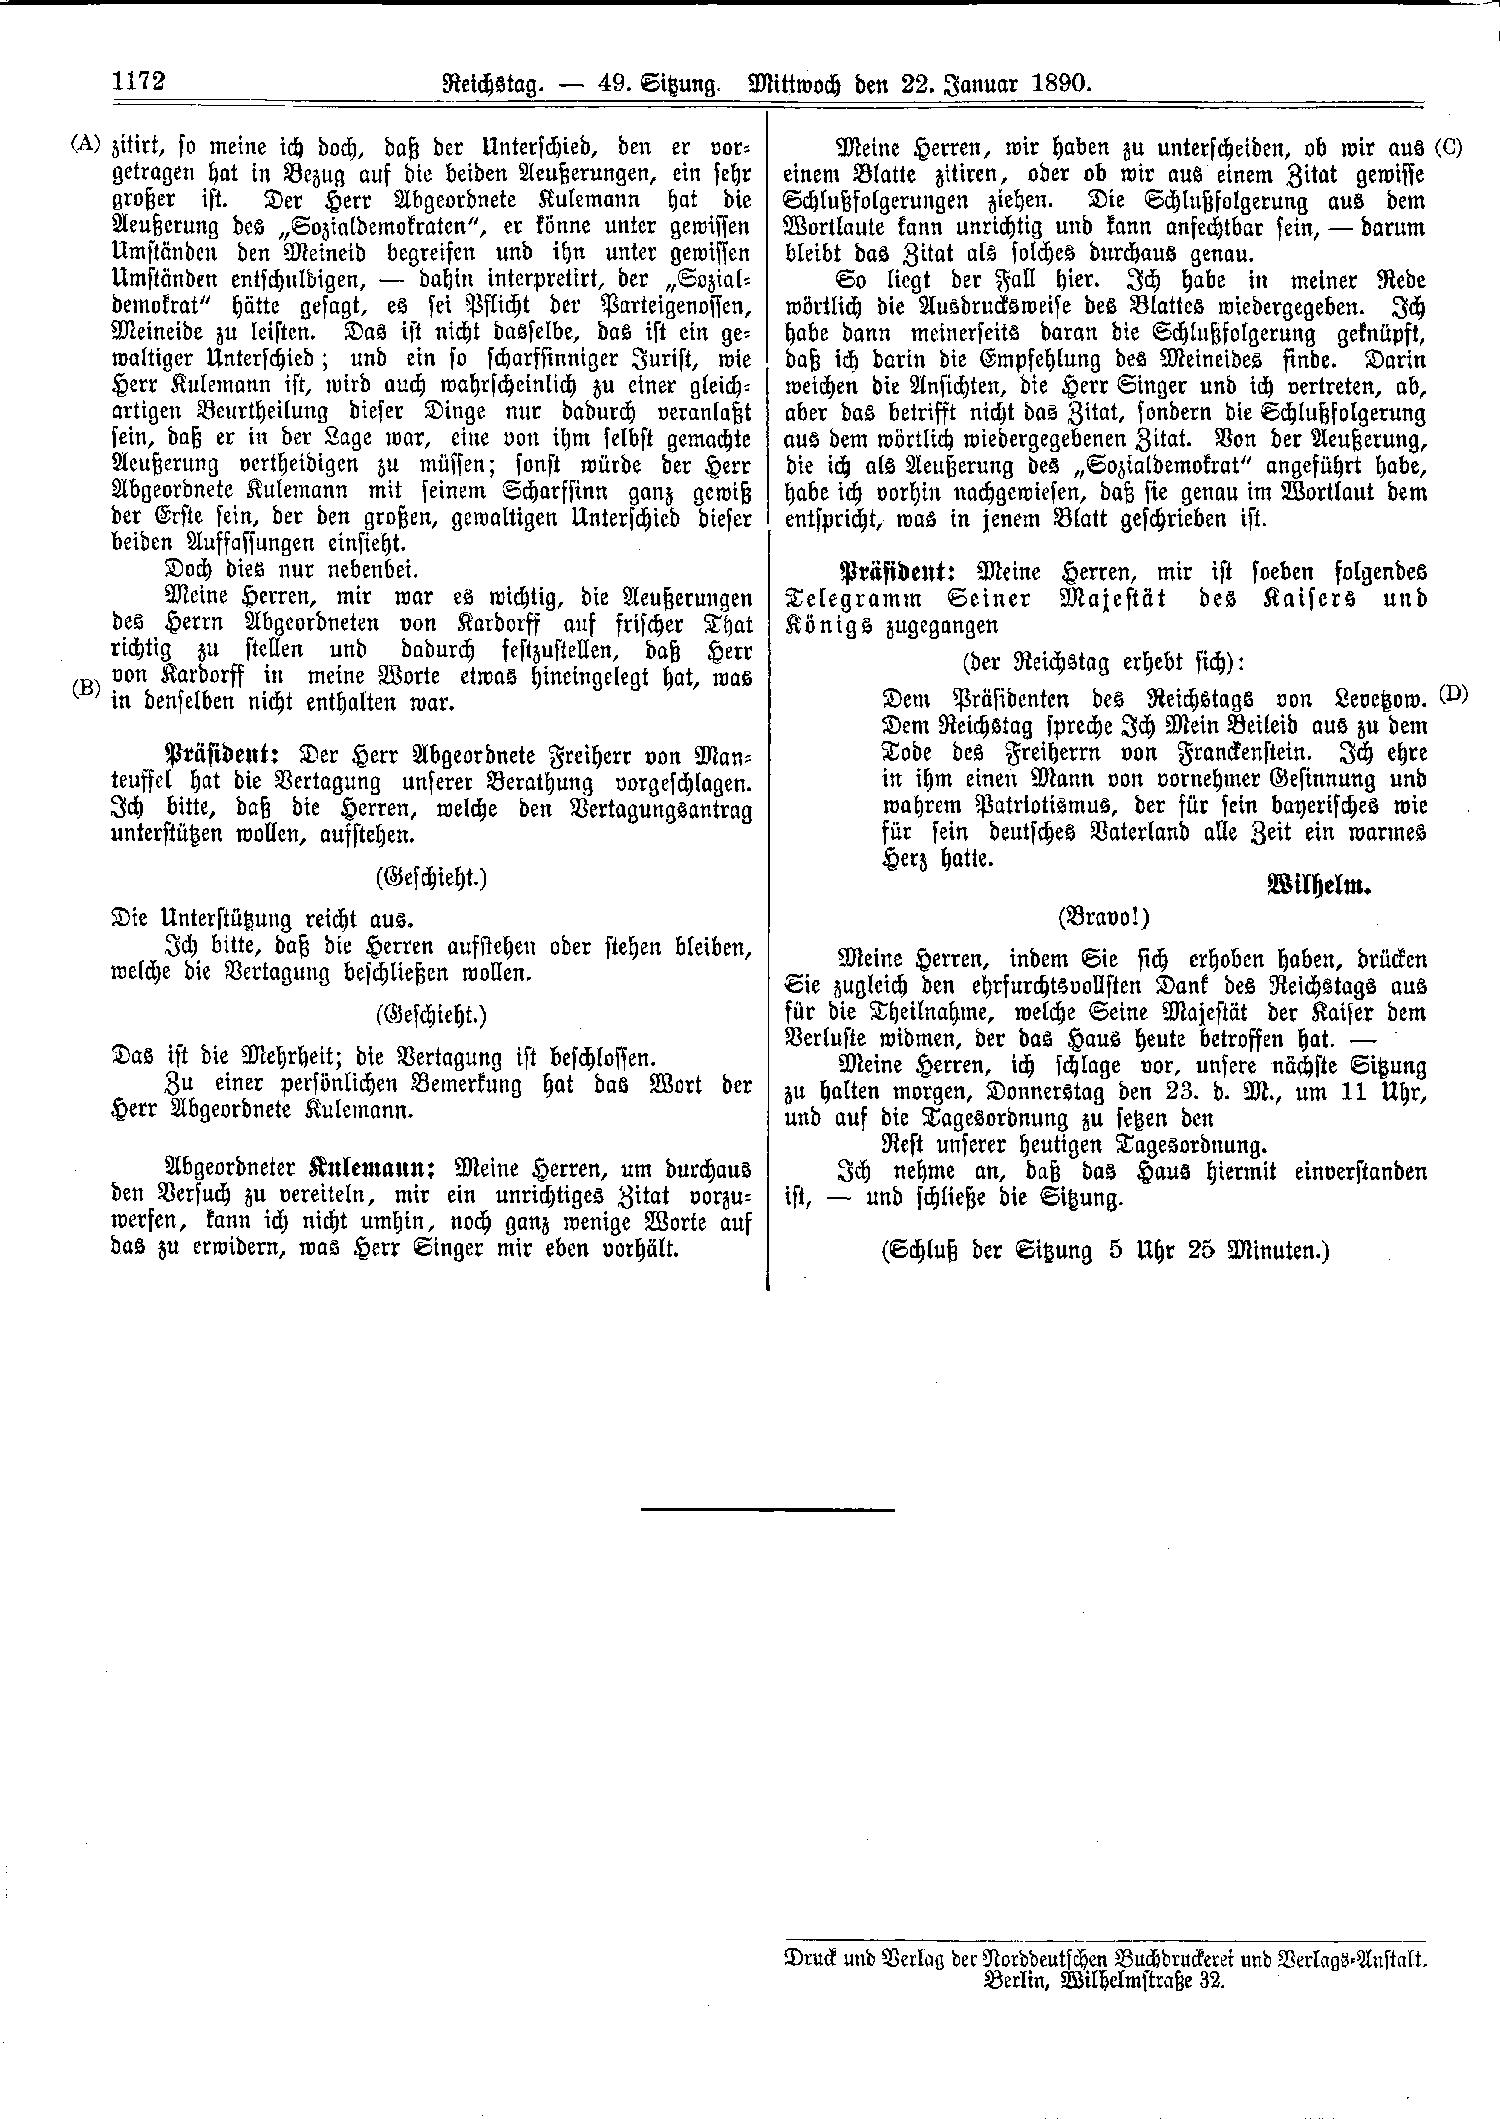 Scan of page DXLVII